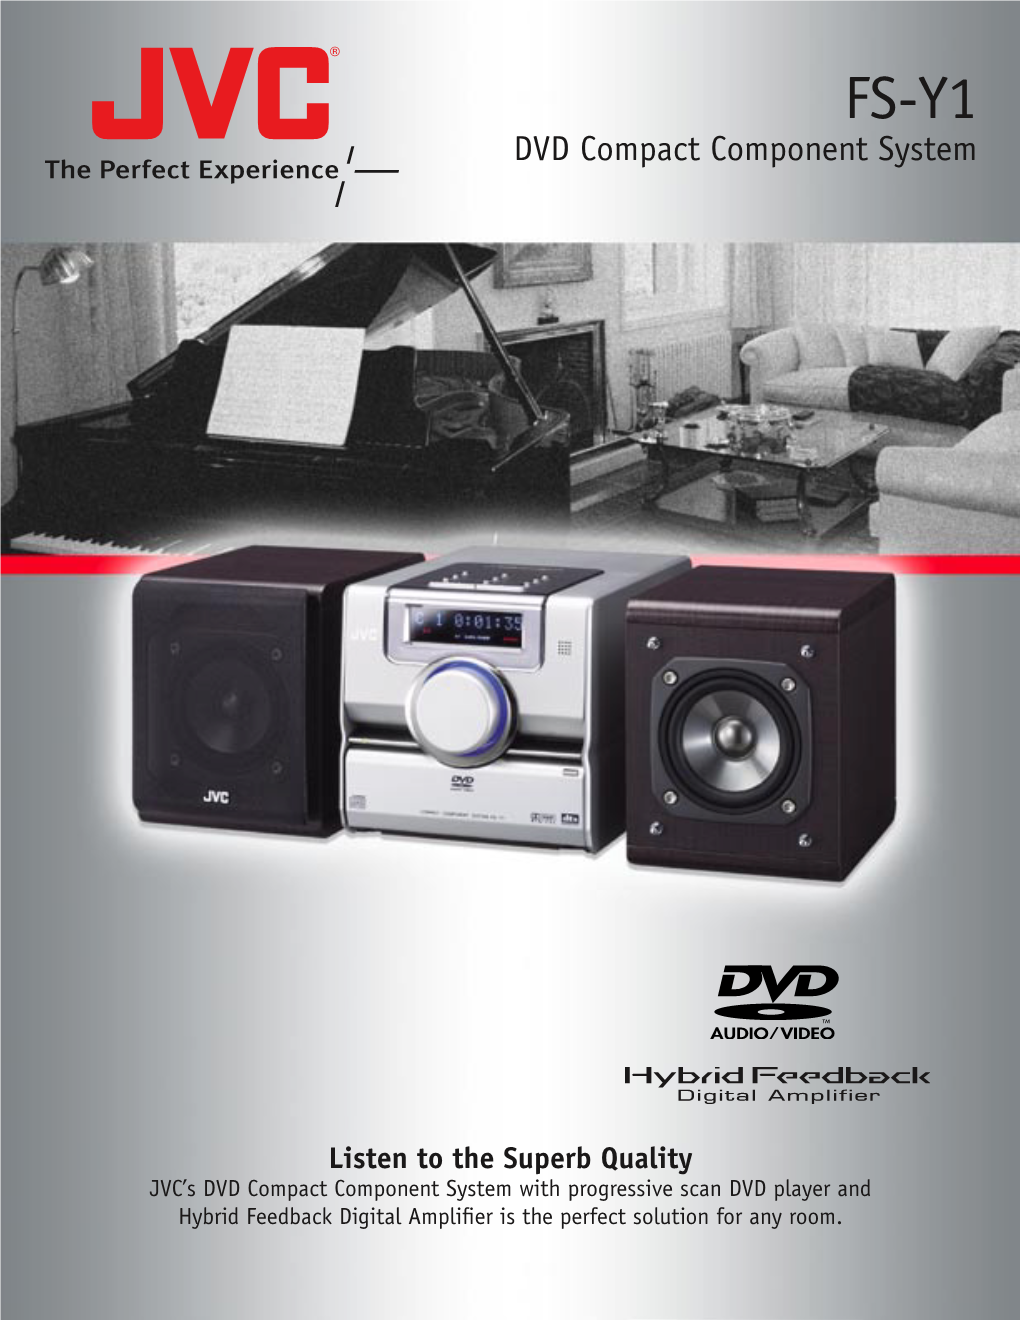 DVD Compact Component System